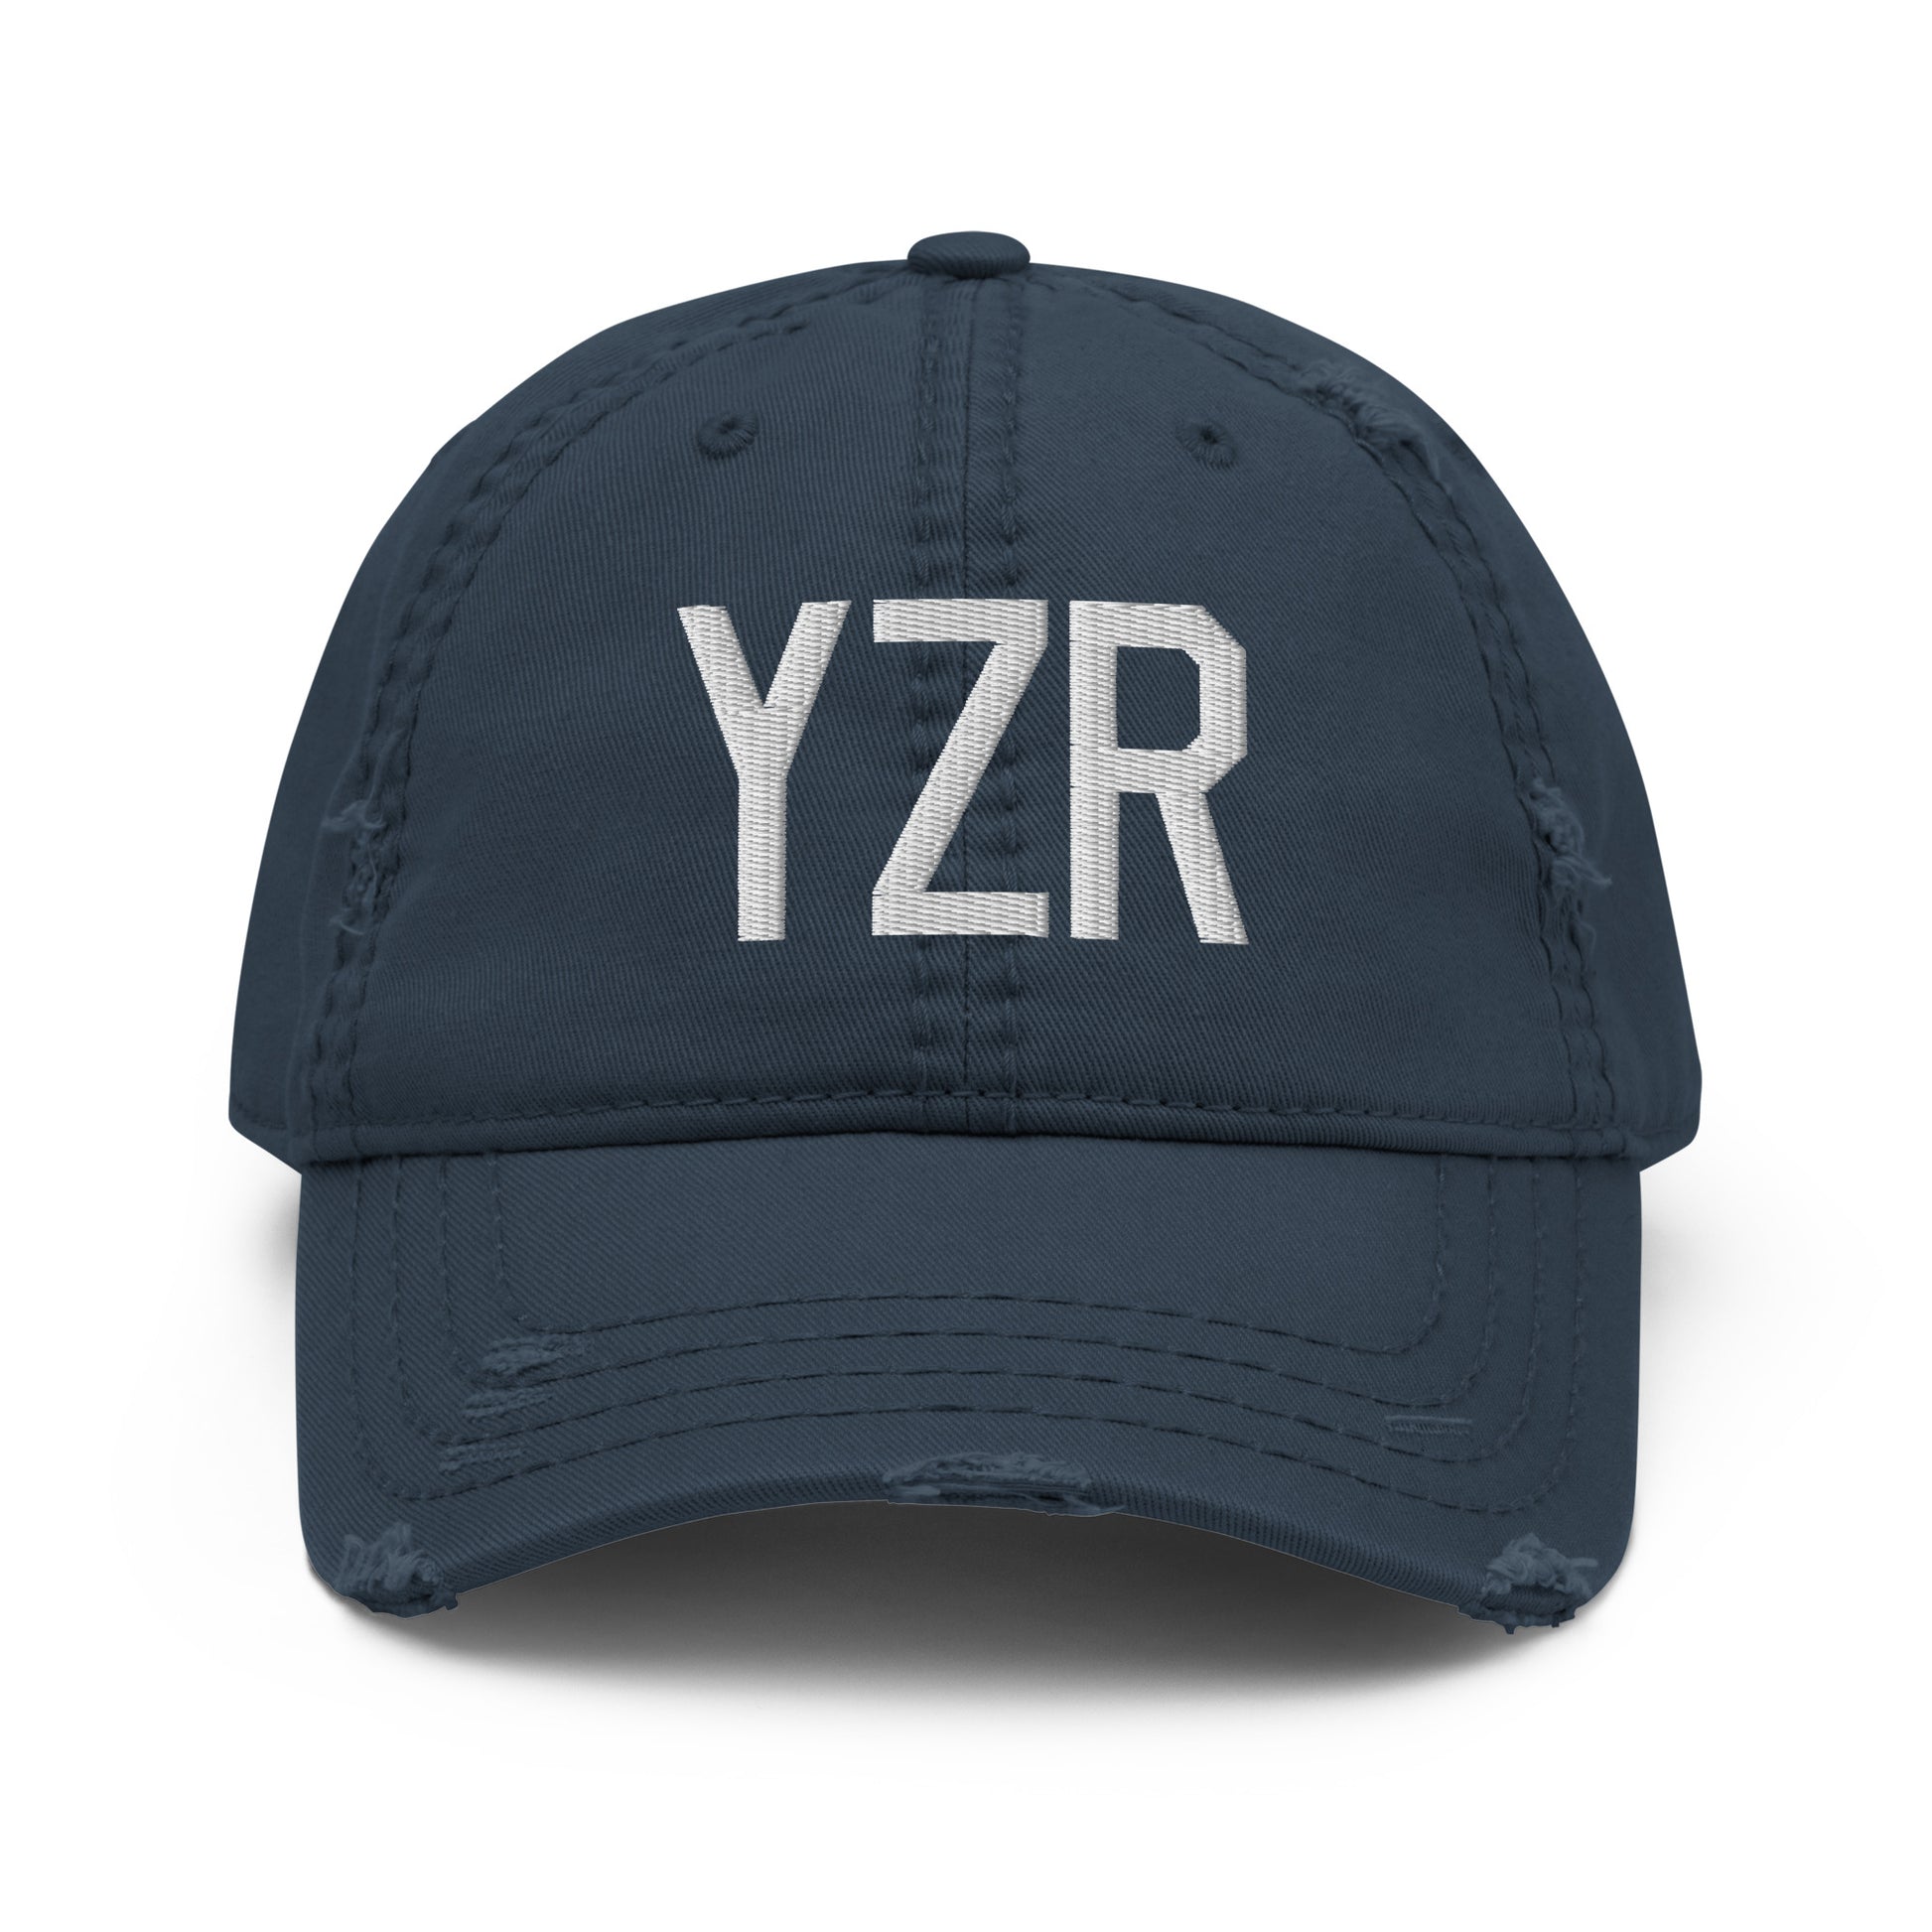 Airport Code Distressed Hat - White • YZR Sarnia • YHM Designs - Image 13